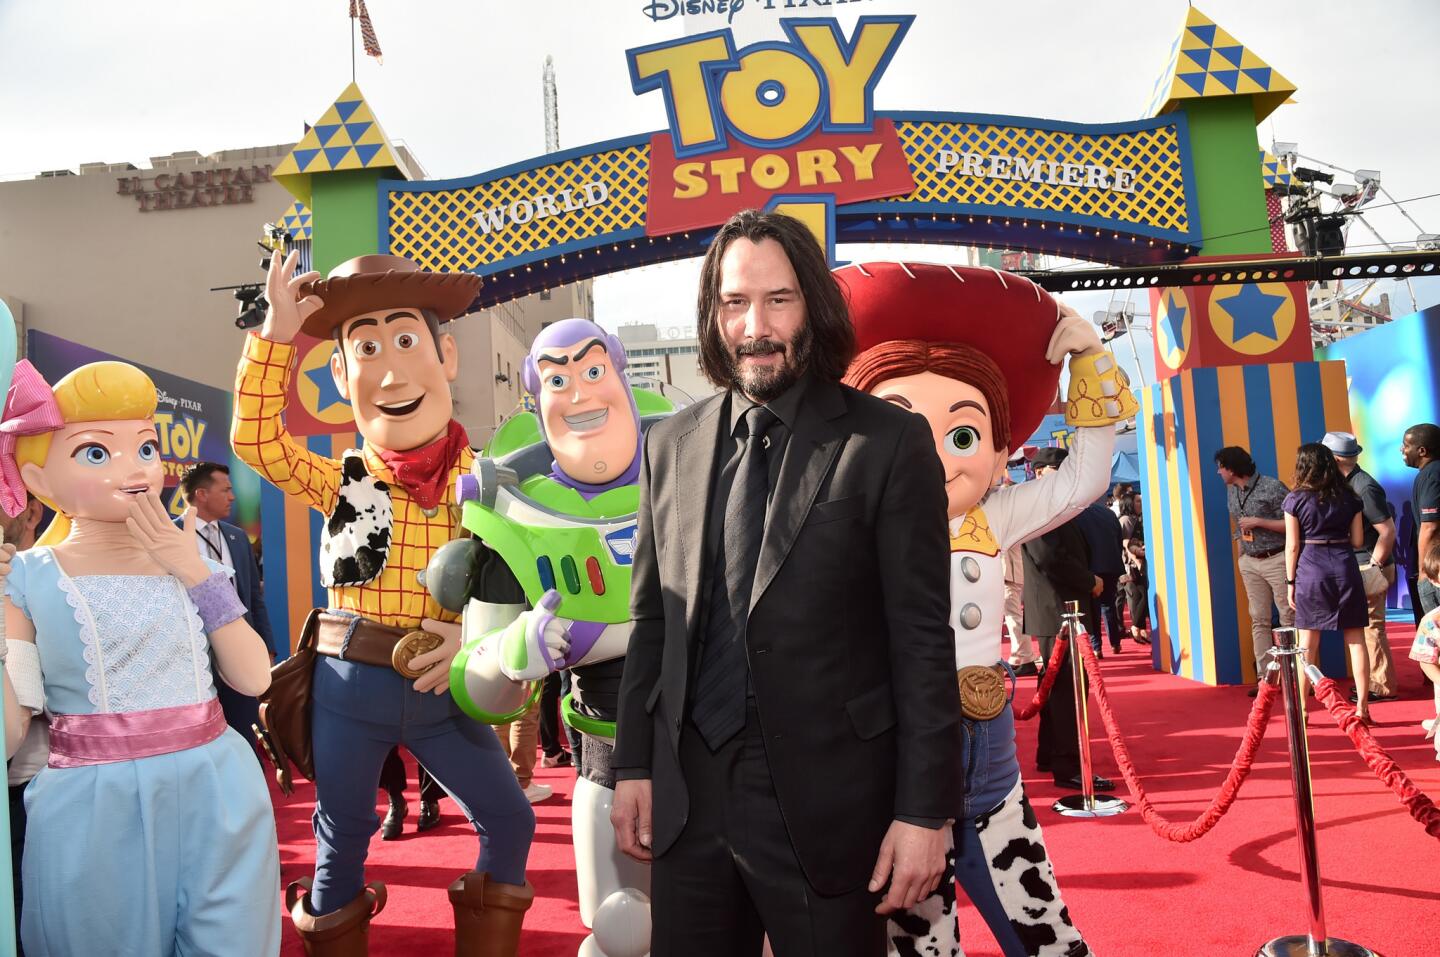 Keanu Reeves poses with characters at the world premiere of Disney and Pixar's "Toy Story 4" at the El Capitan Theatre in Hollywood, CA on Tuesday, June 11, 2019.